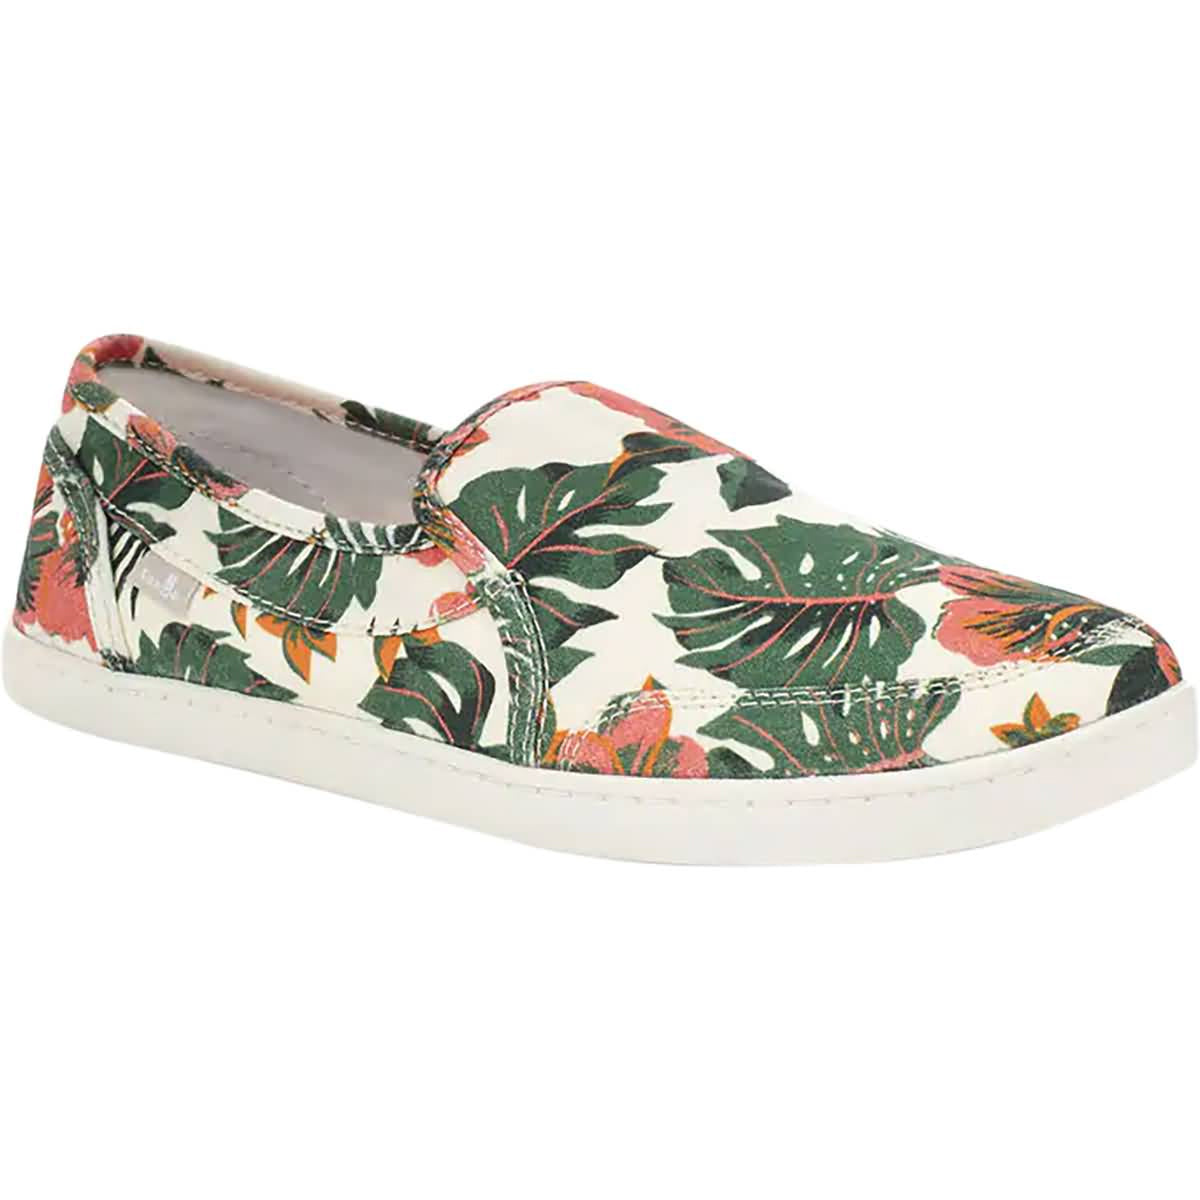 Sanuk Pair O Dice Floral Women's Shoes Footwear (Brand New) –